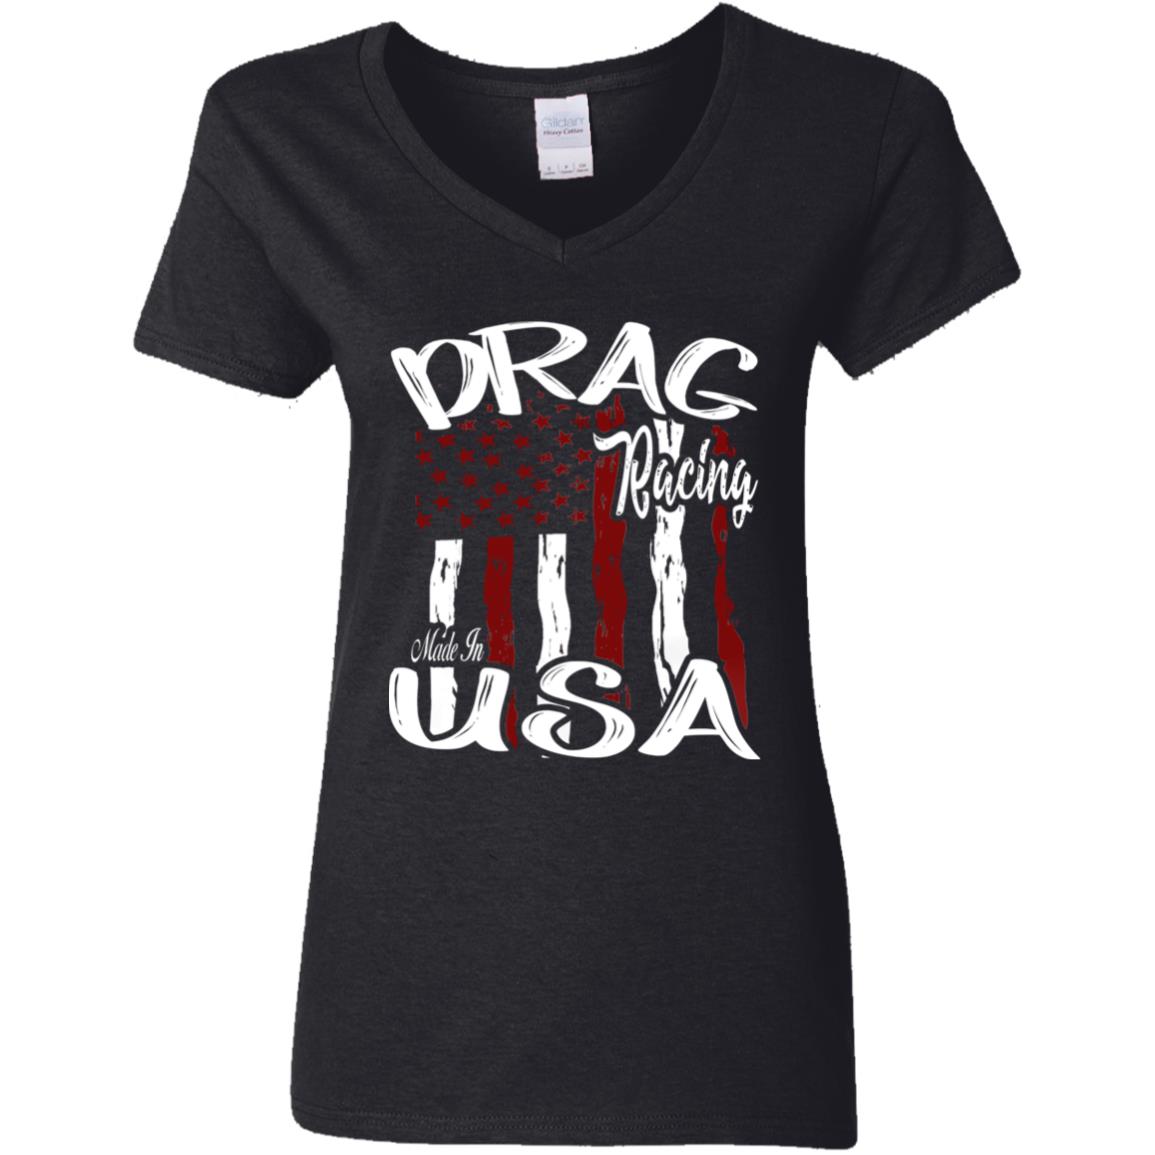 Drag Racing Made In USA Ladies' 5.3 oz. V-Neck T-Shirt